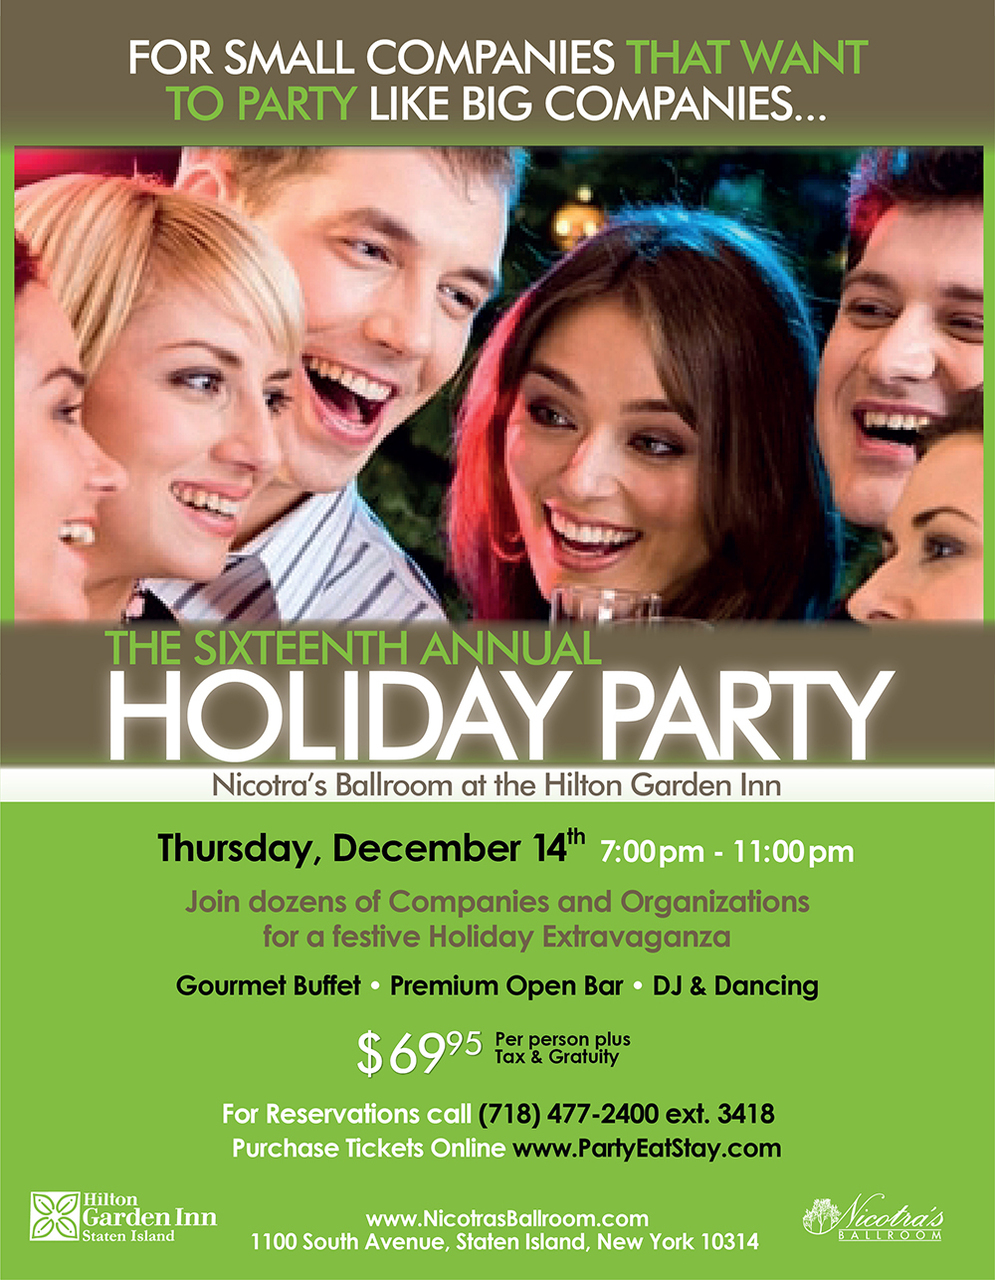 The Sixteenth Annual Holiday Party